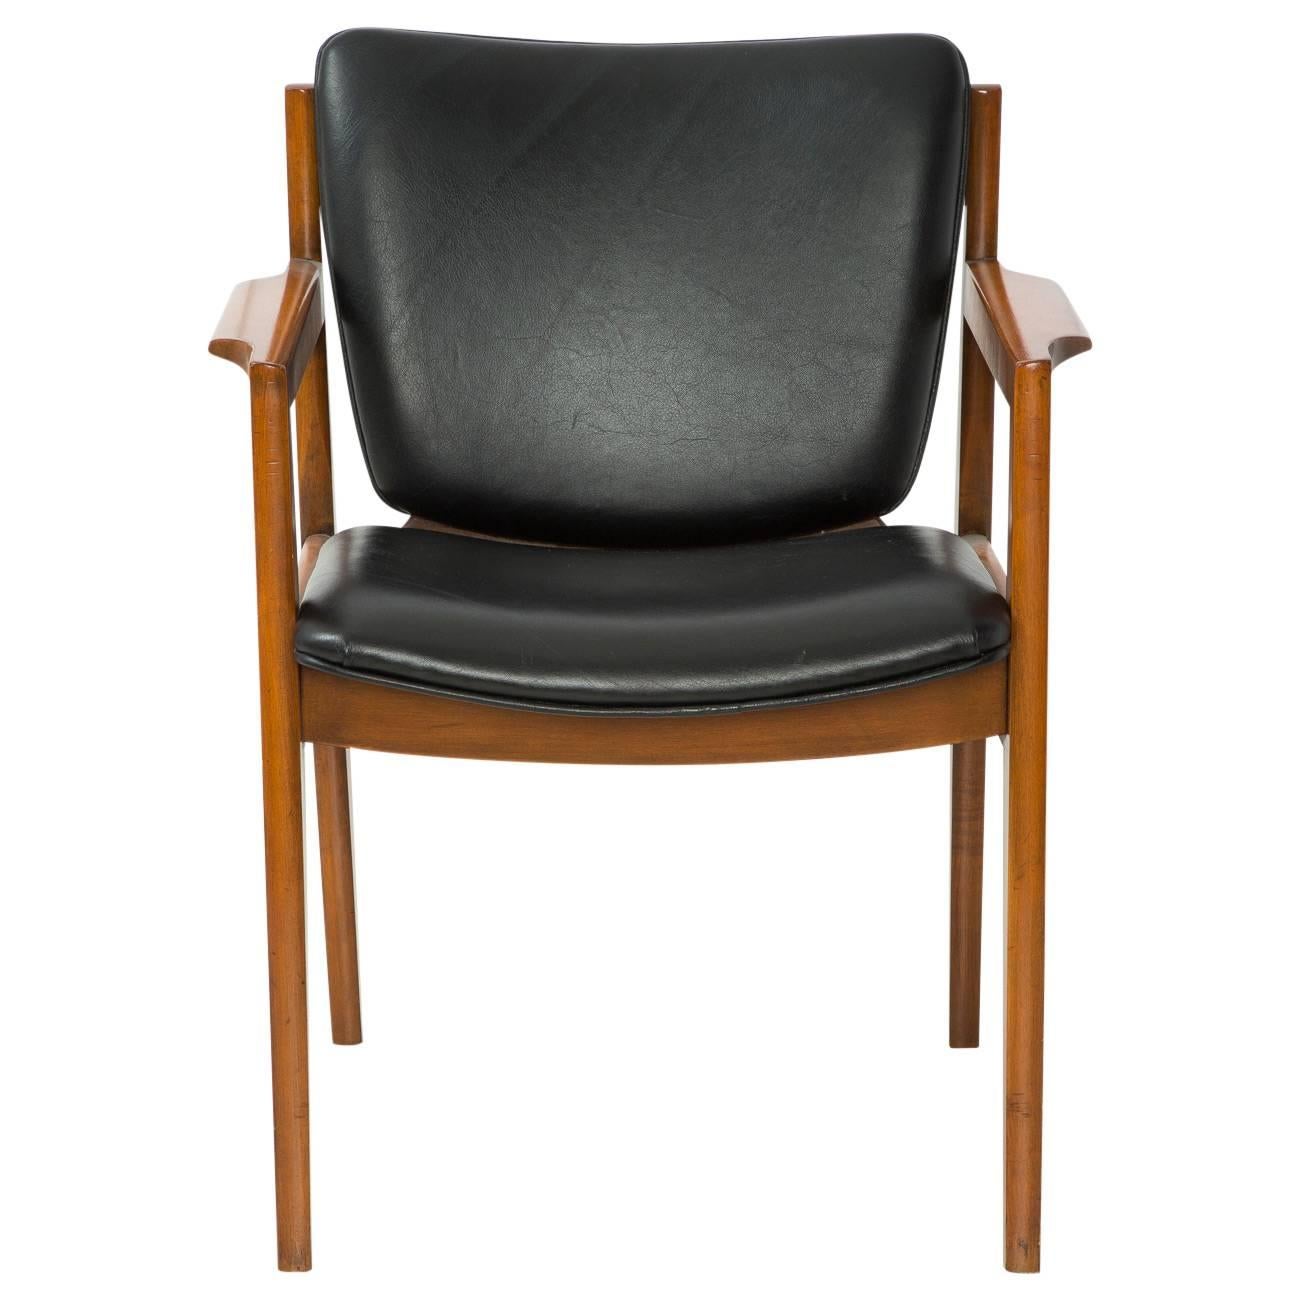 The perfect Danish modern armchair for your study, living room, or anywhere in your home. The leather and wood are in fantastic vintage condition.